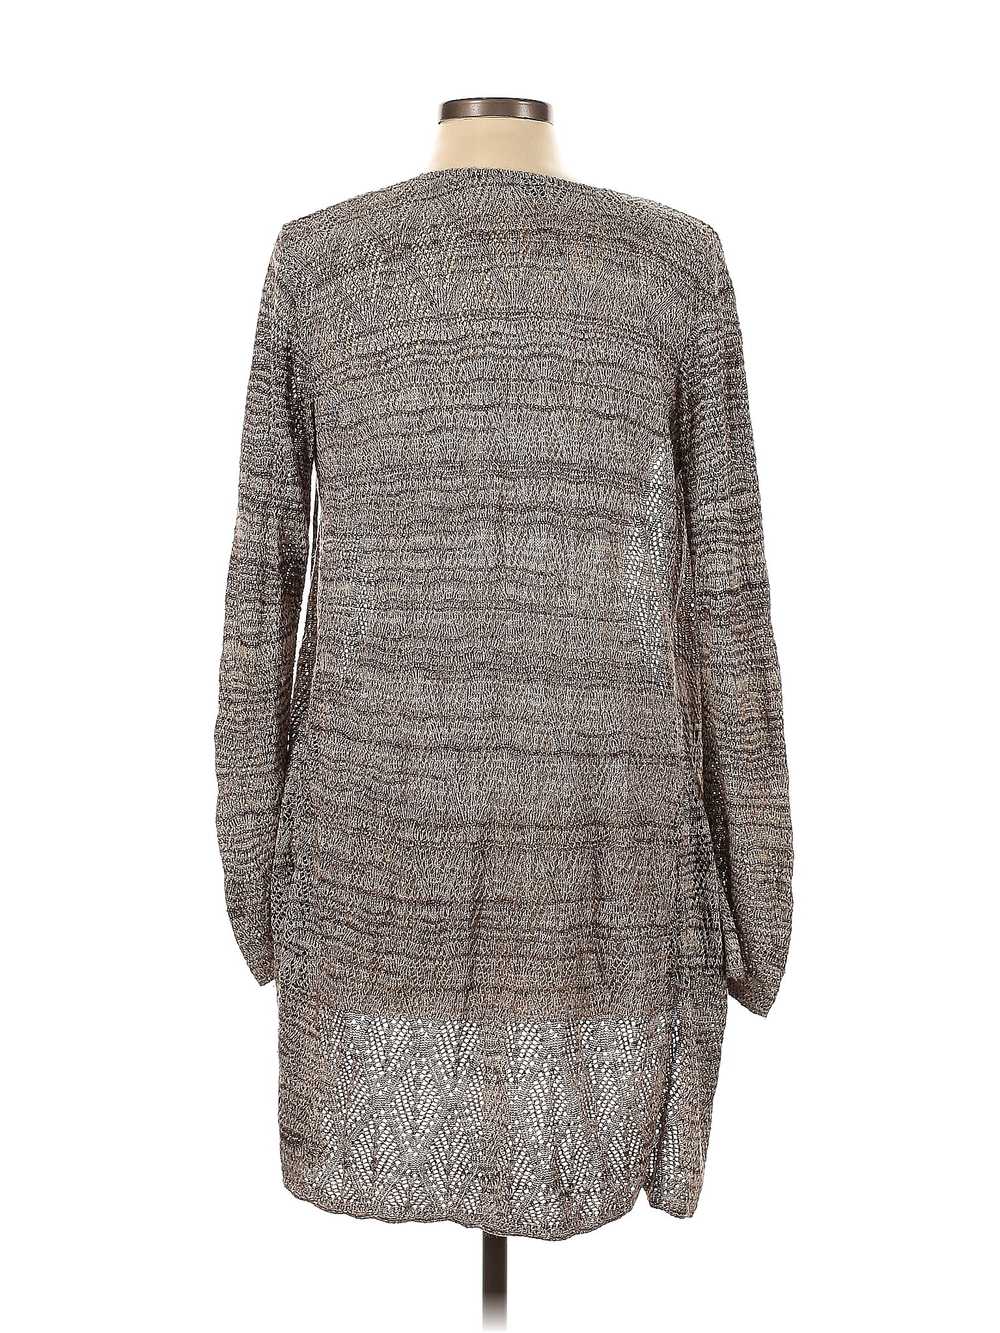 Collection XIIX Women Gray Cardigan L - image 2